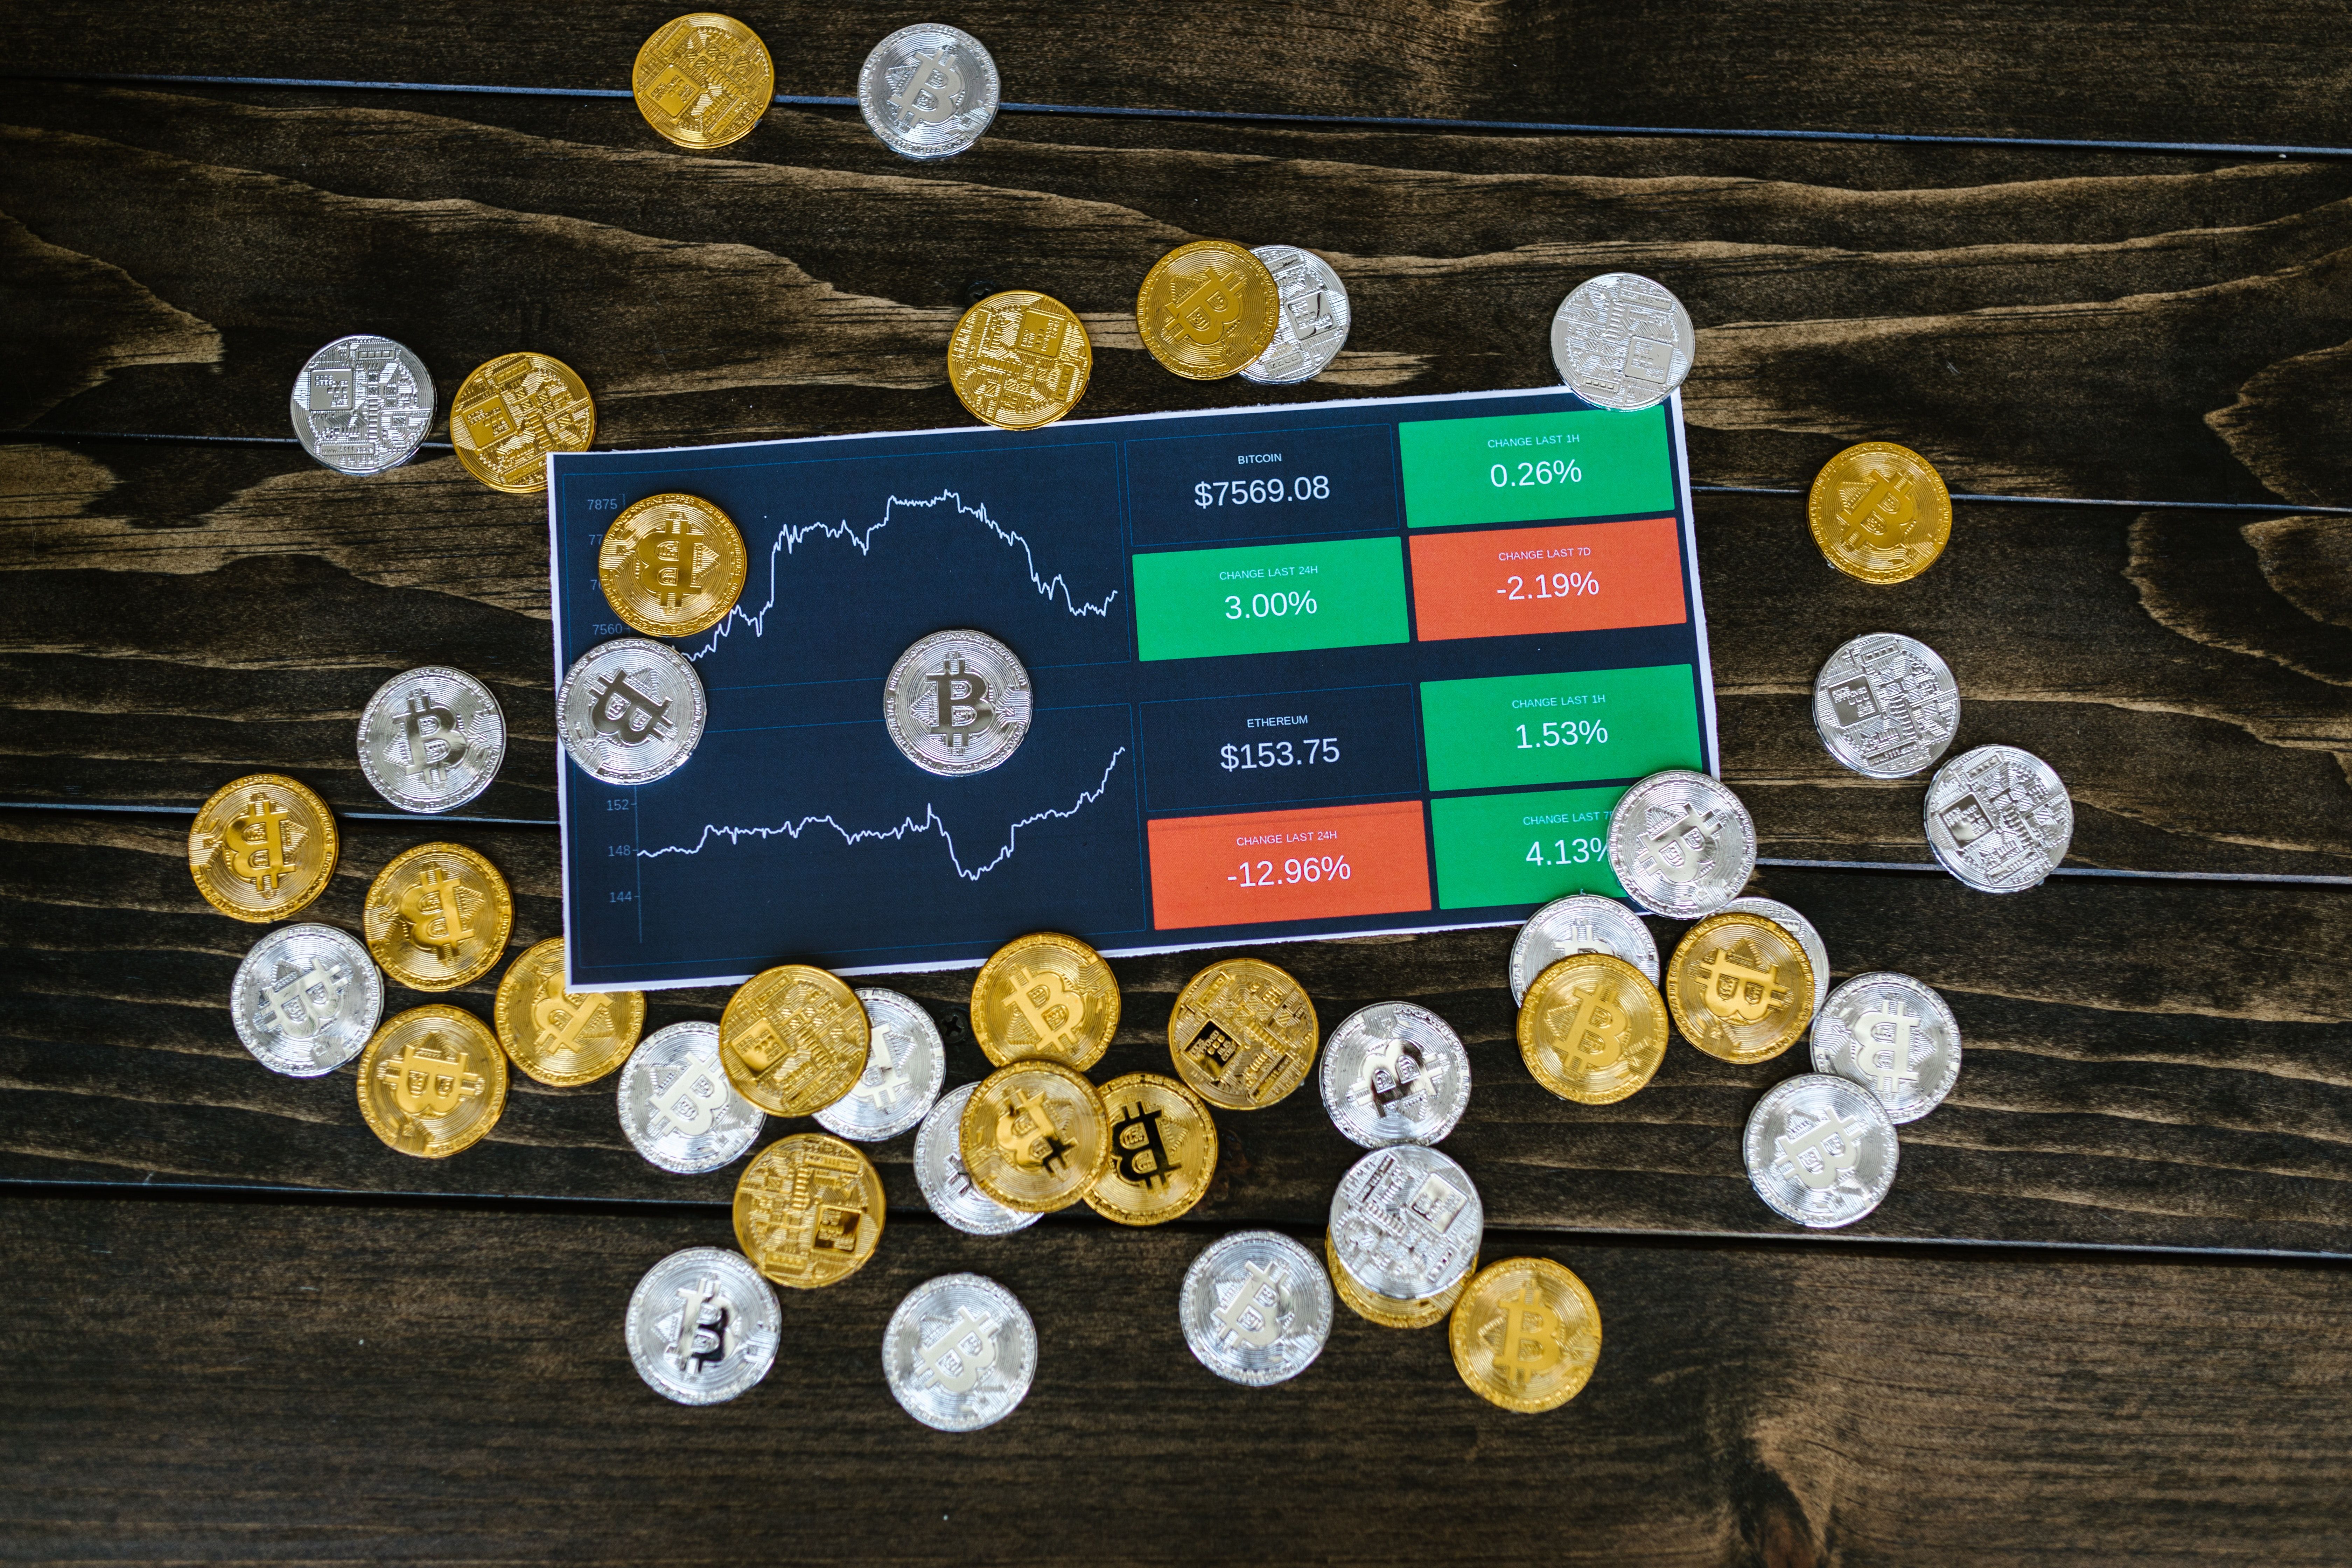 cryptocurrency coins scattered on table